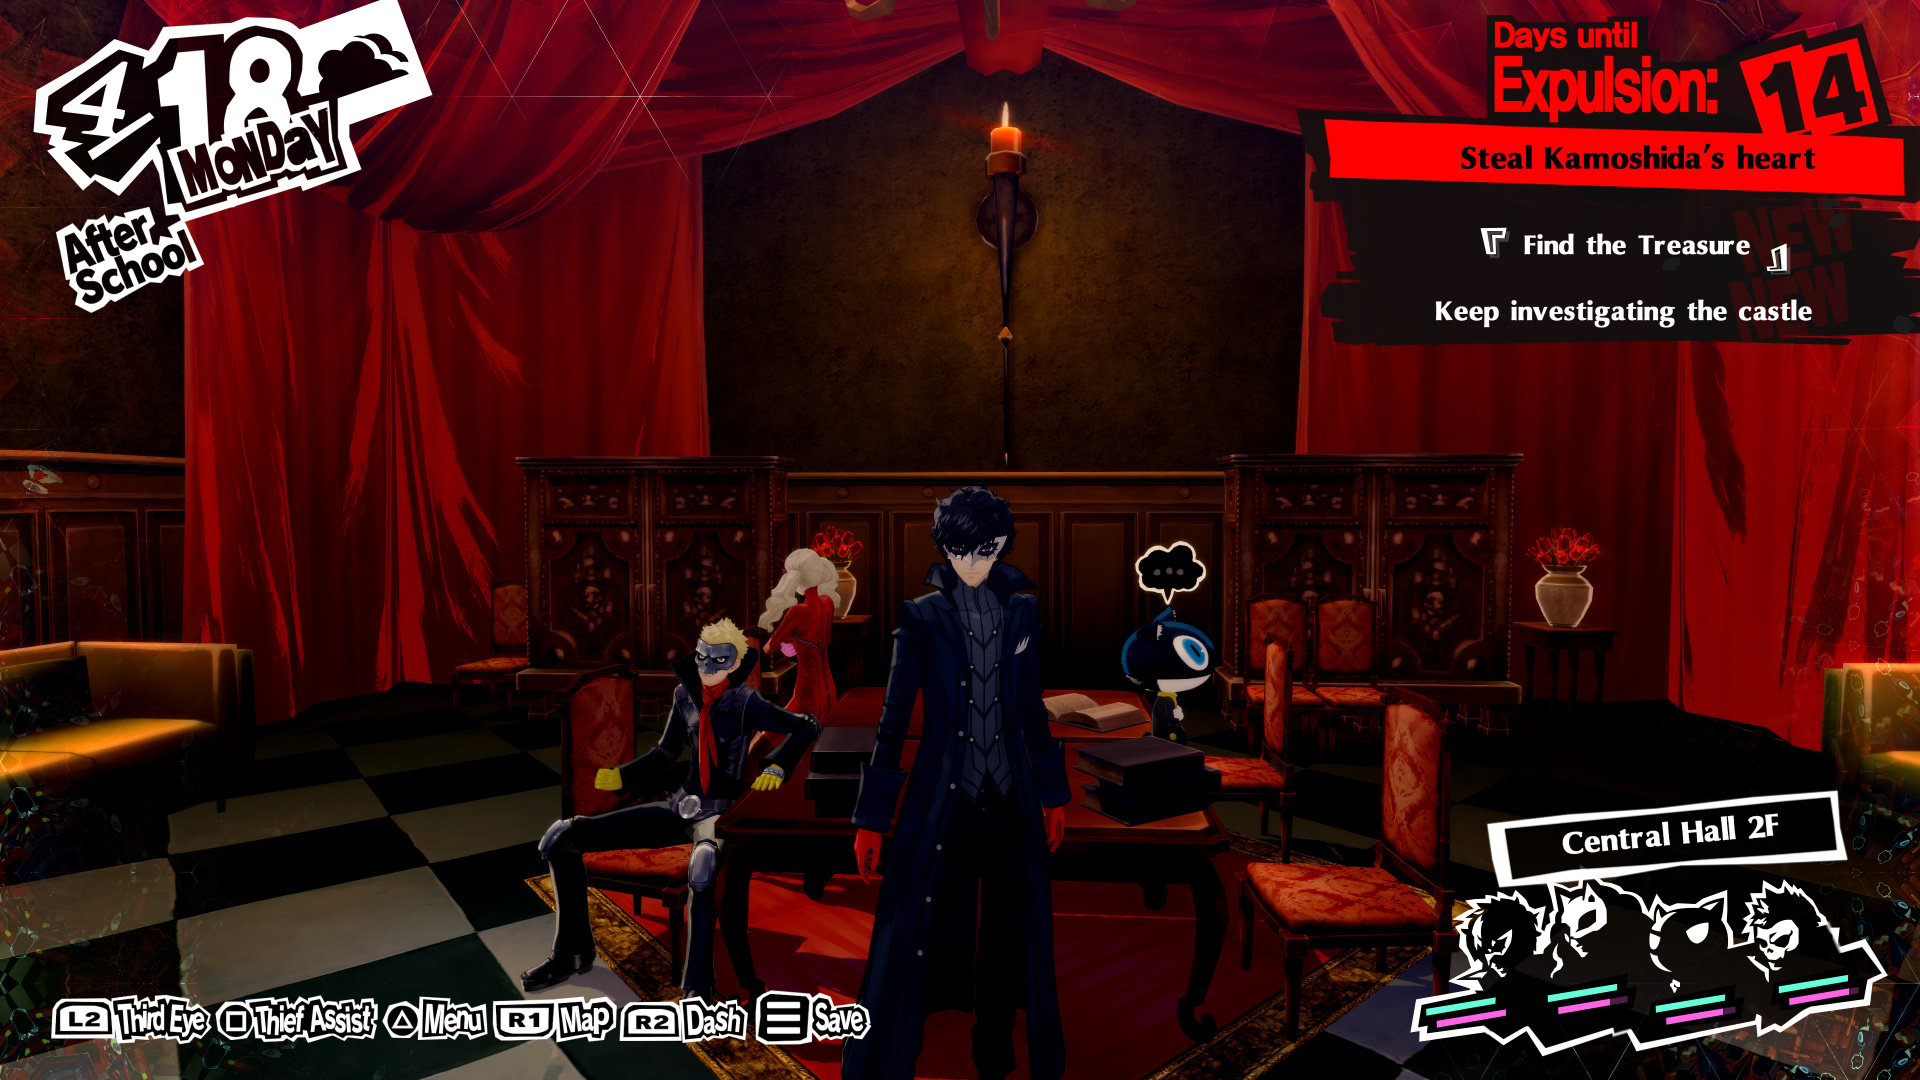 Persona 5 Royal PS5 Review: A Masterpiece Gets Even Better